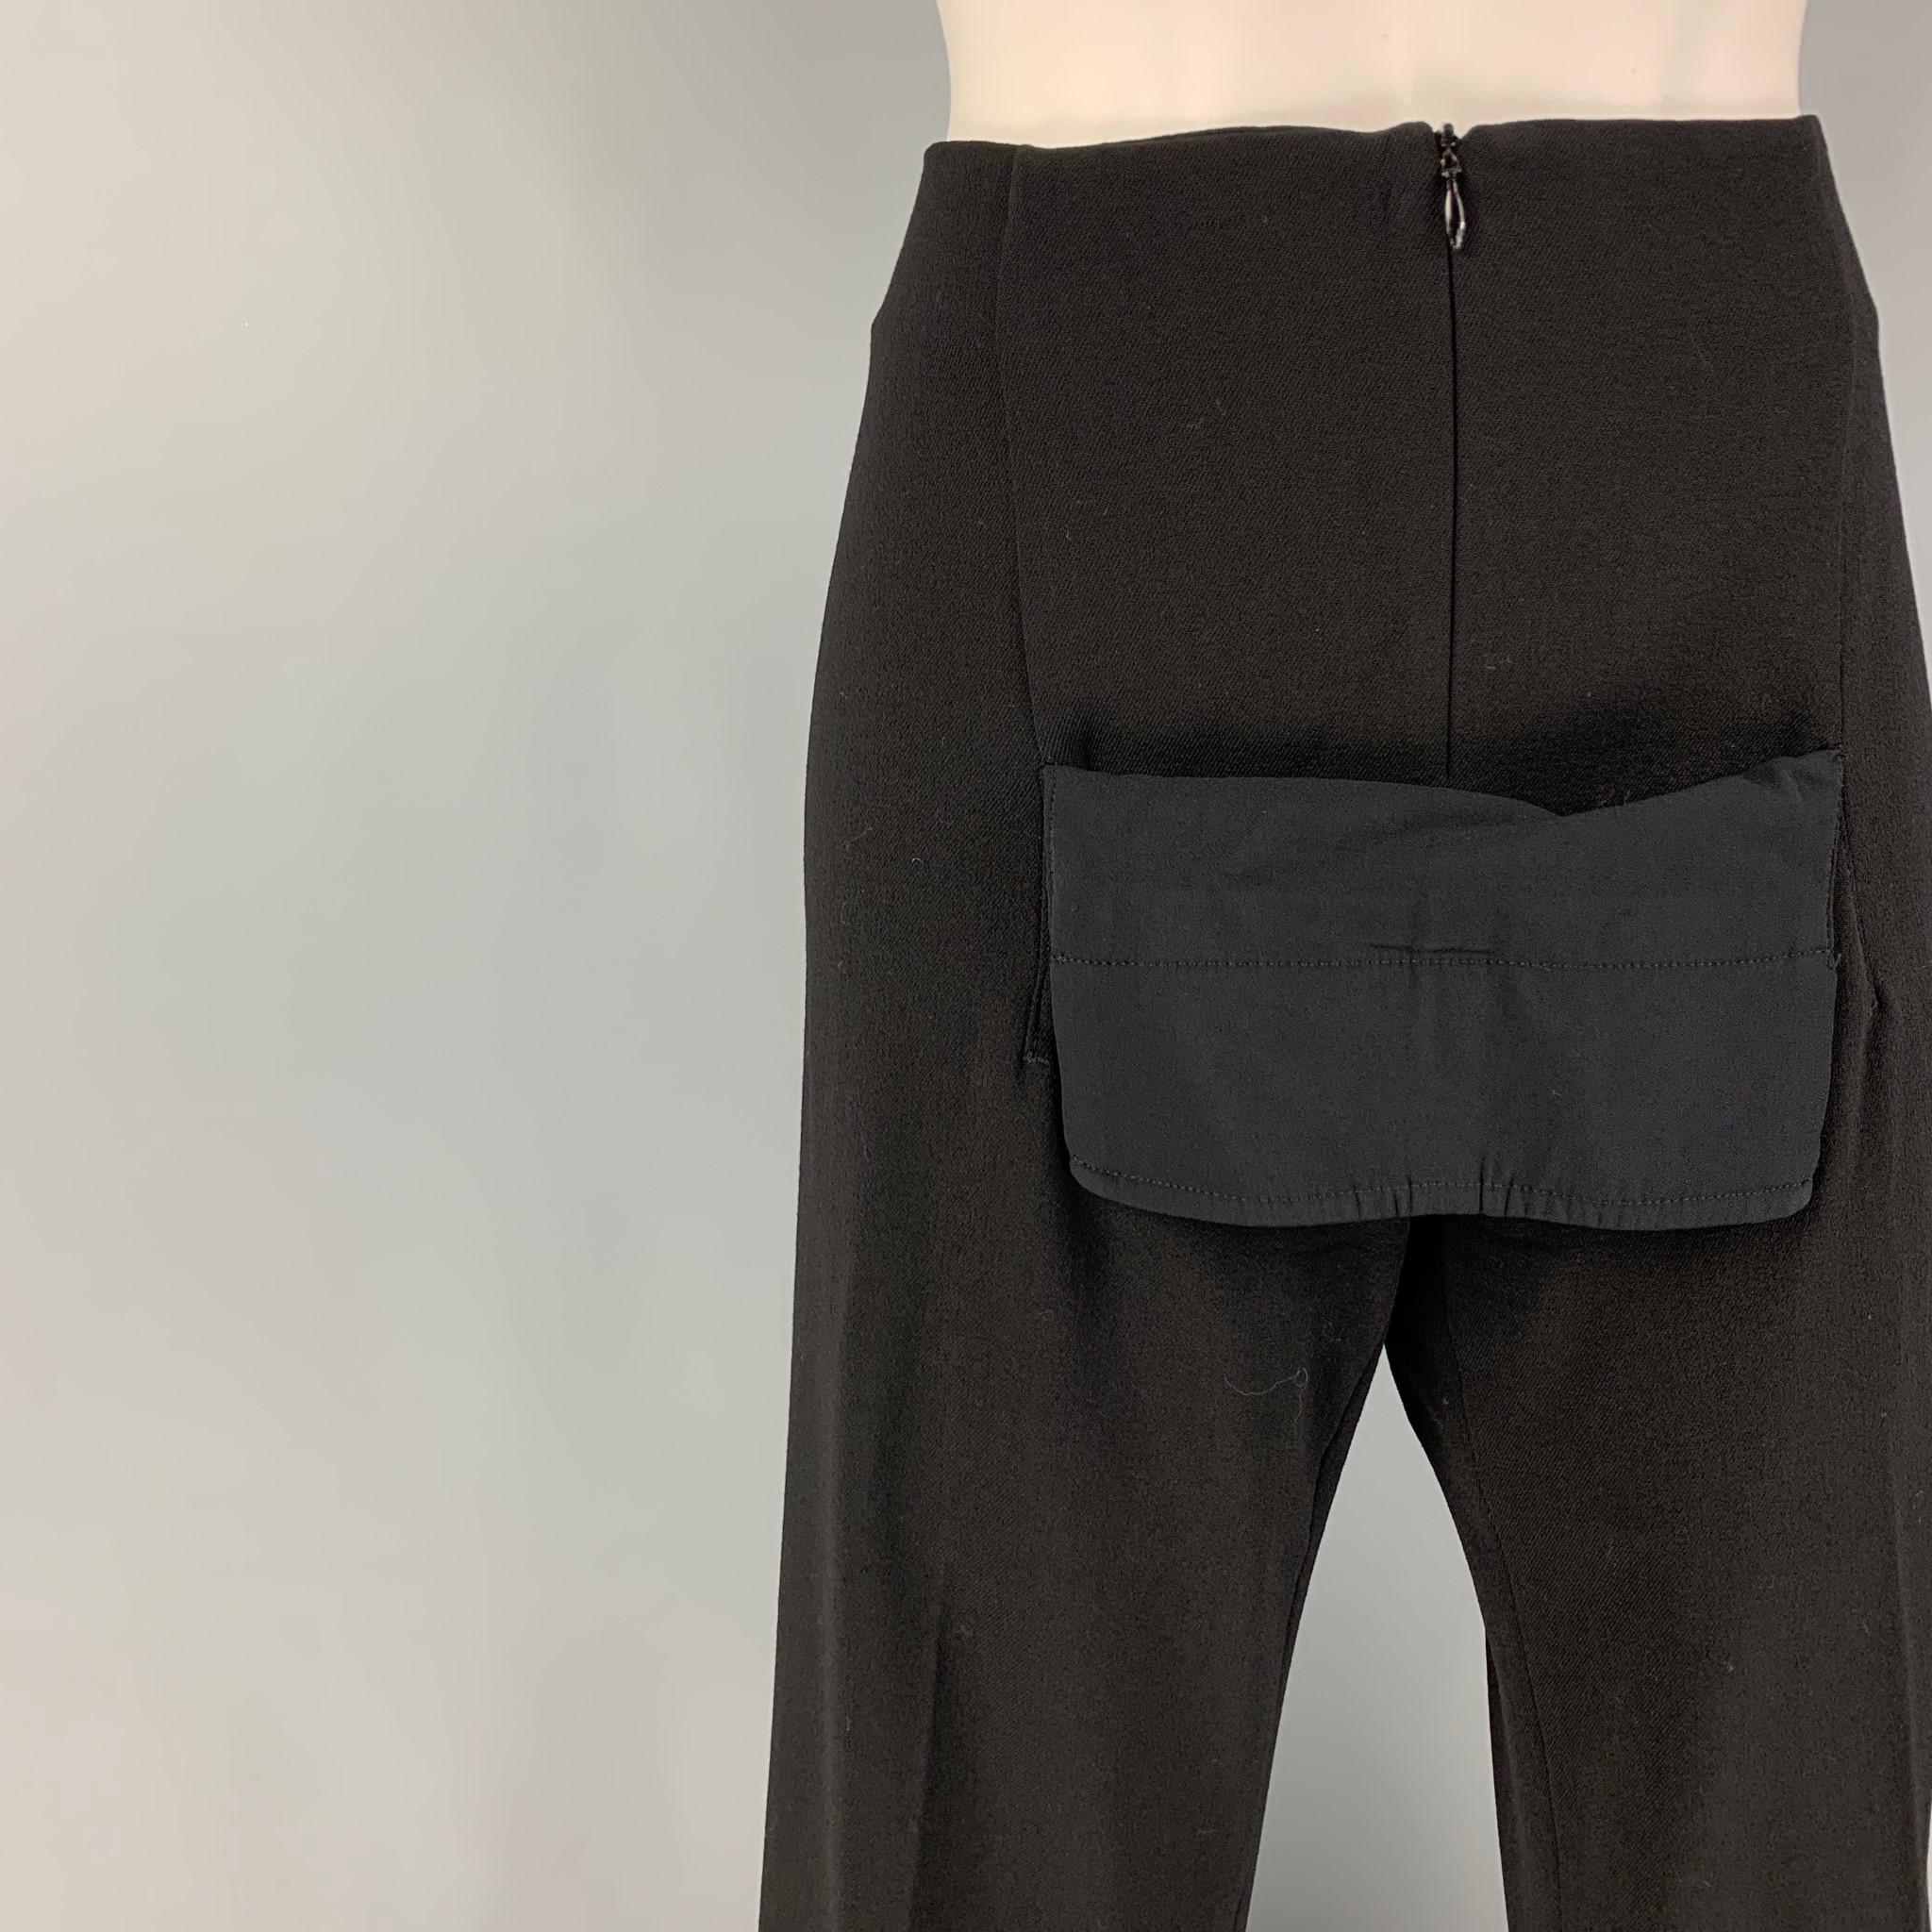 JEAN PAUL GAULTIER pants comes in a black wool / polyamide featuring a front panel design, wide leg, and a front zipper closure. Made in Italy. 

Very Good Pre-Owned Condition.
Marked: I 42 / D 38 / F 38 / GB 10 / USA 8
Original Retail Price: